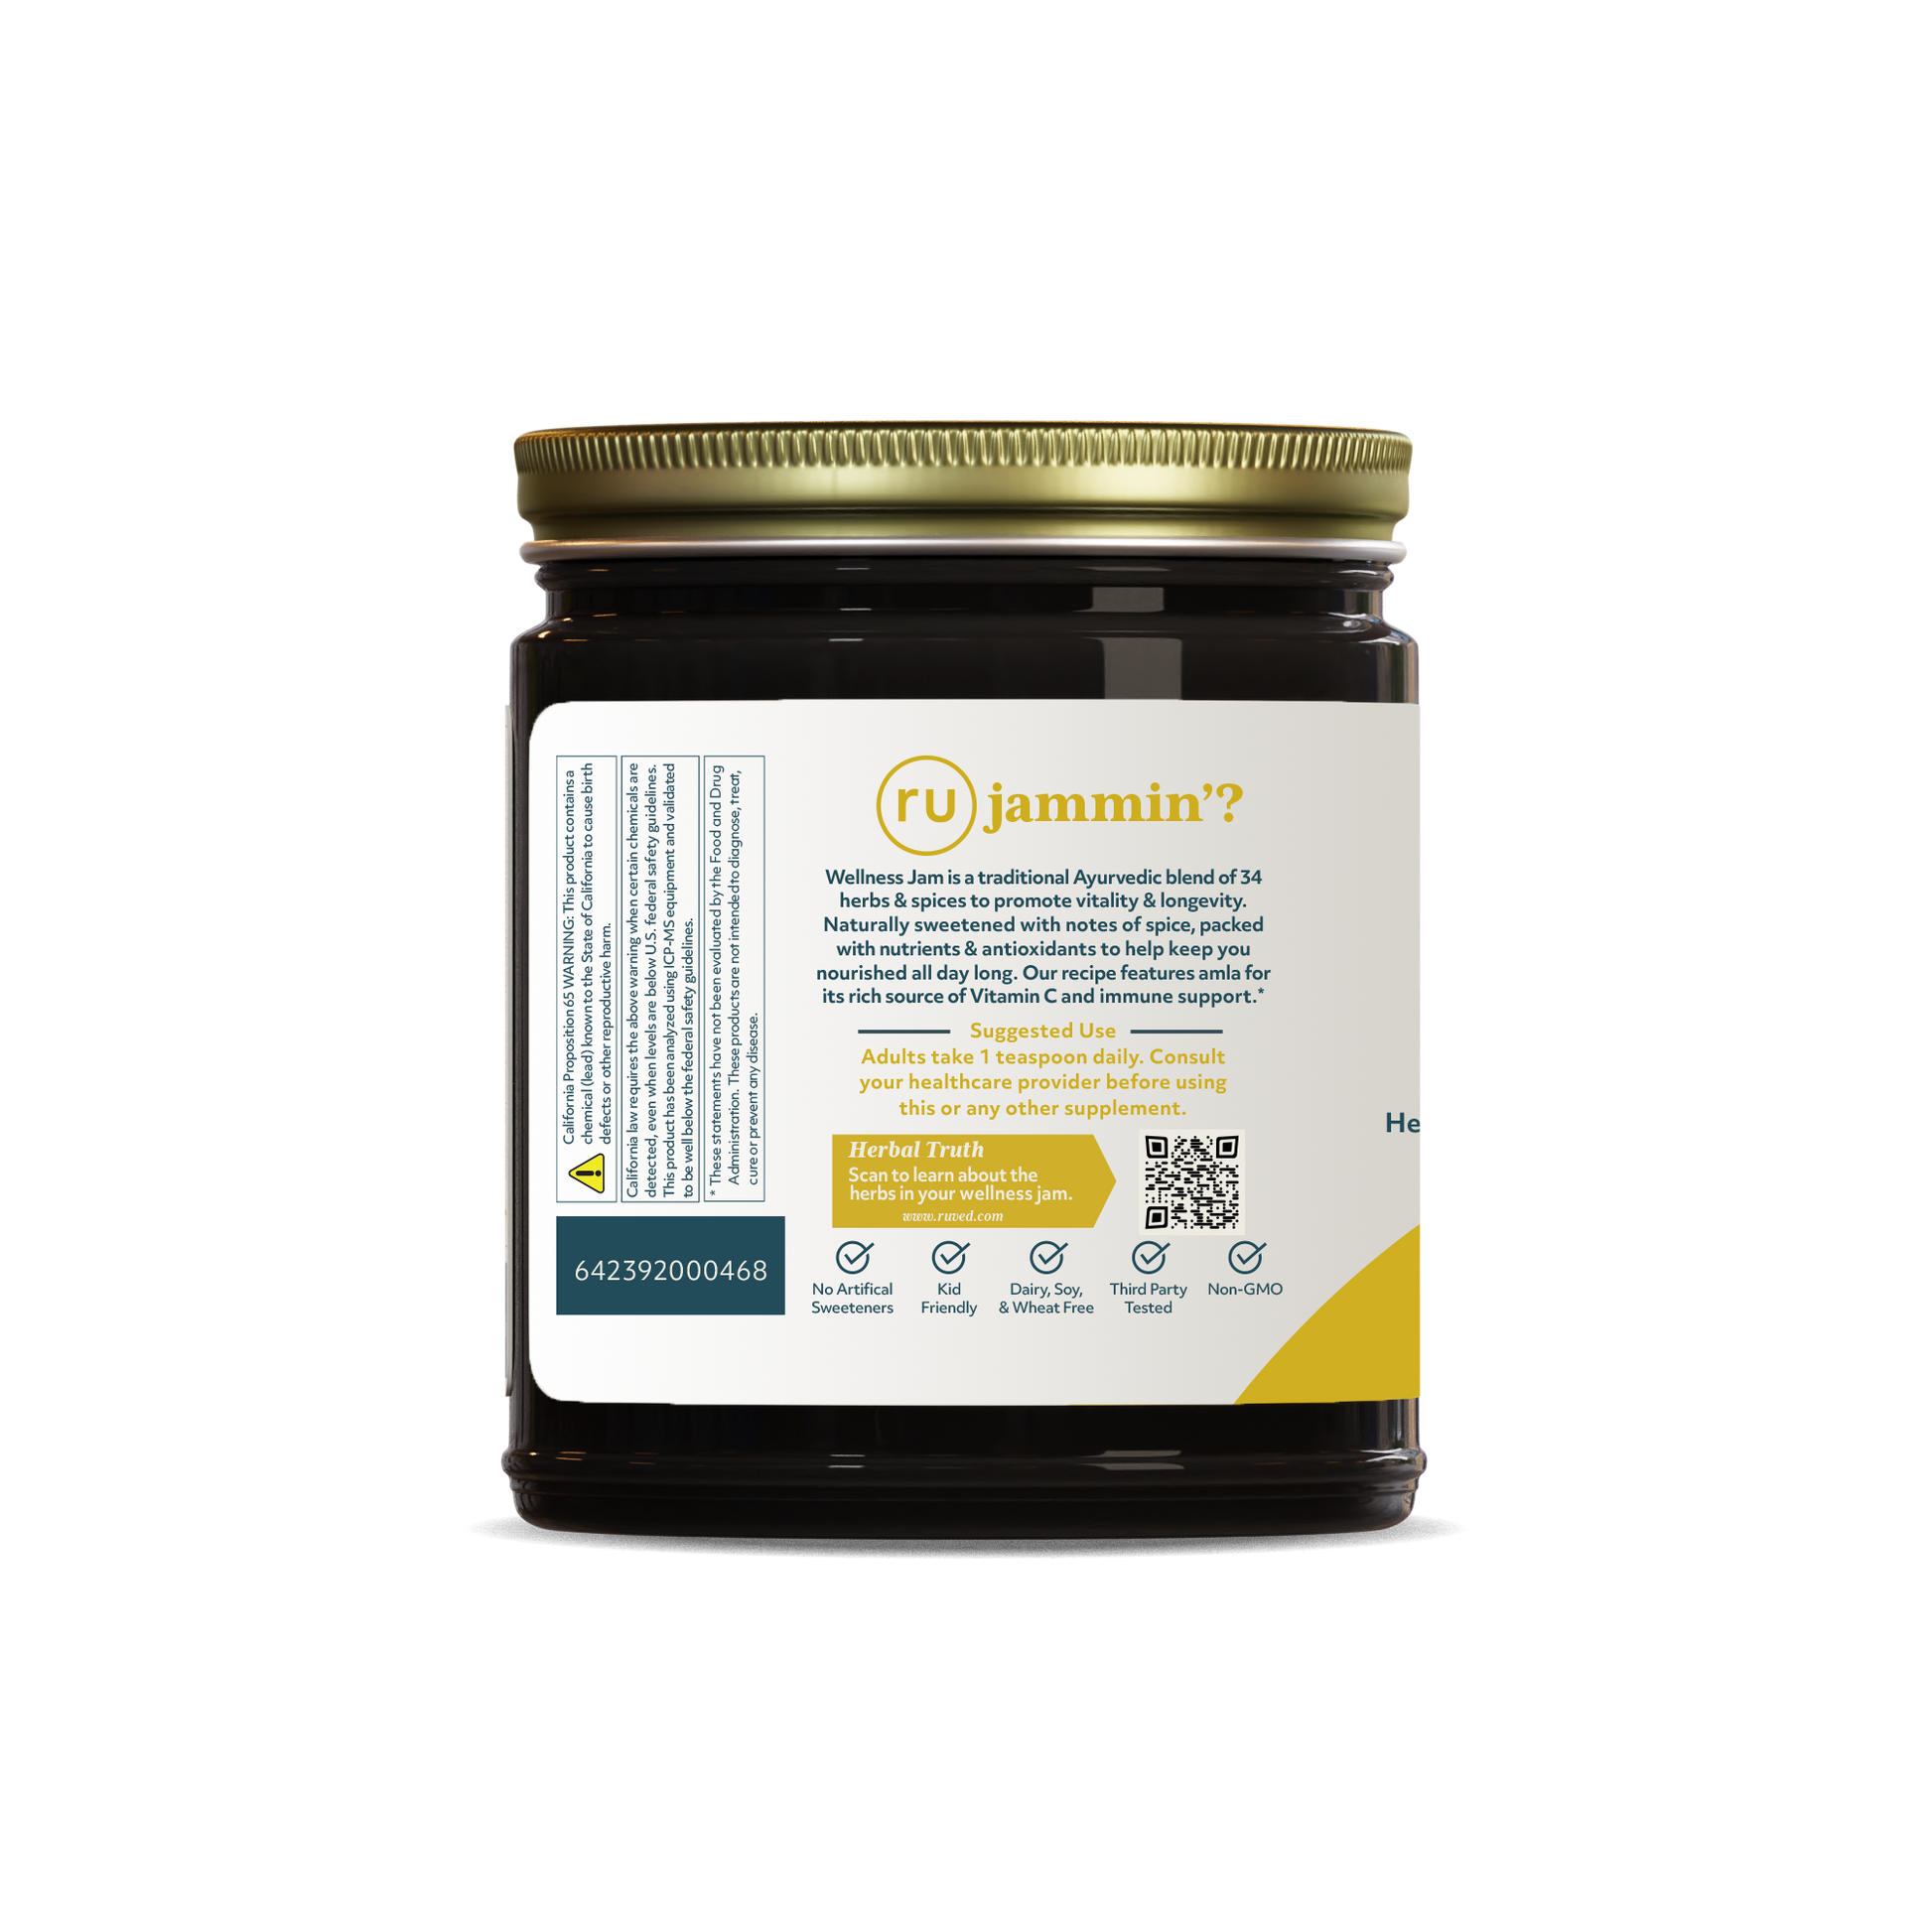 Wellness Jam Jar Description Side - Finely crafted antioxidant-packed jam for Day Nourishment - 300 gm Jar, Perfect for Immune Support + Healthy Aging with ingredients like Honey and Amla.